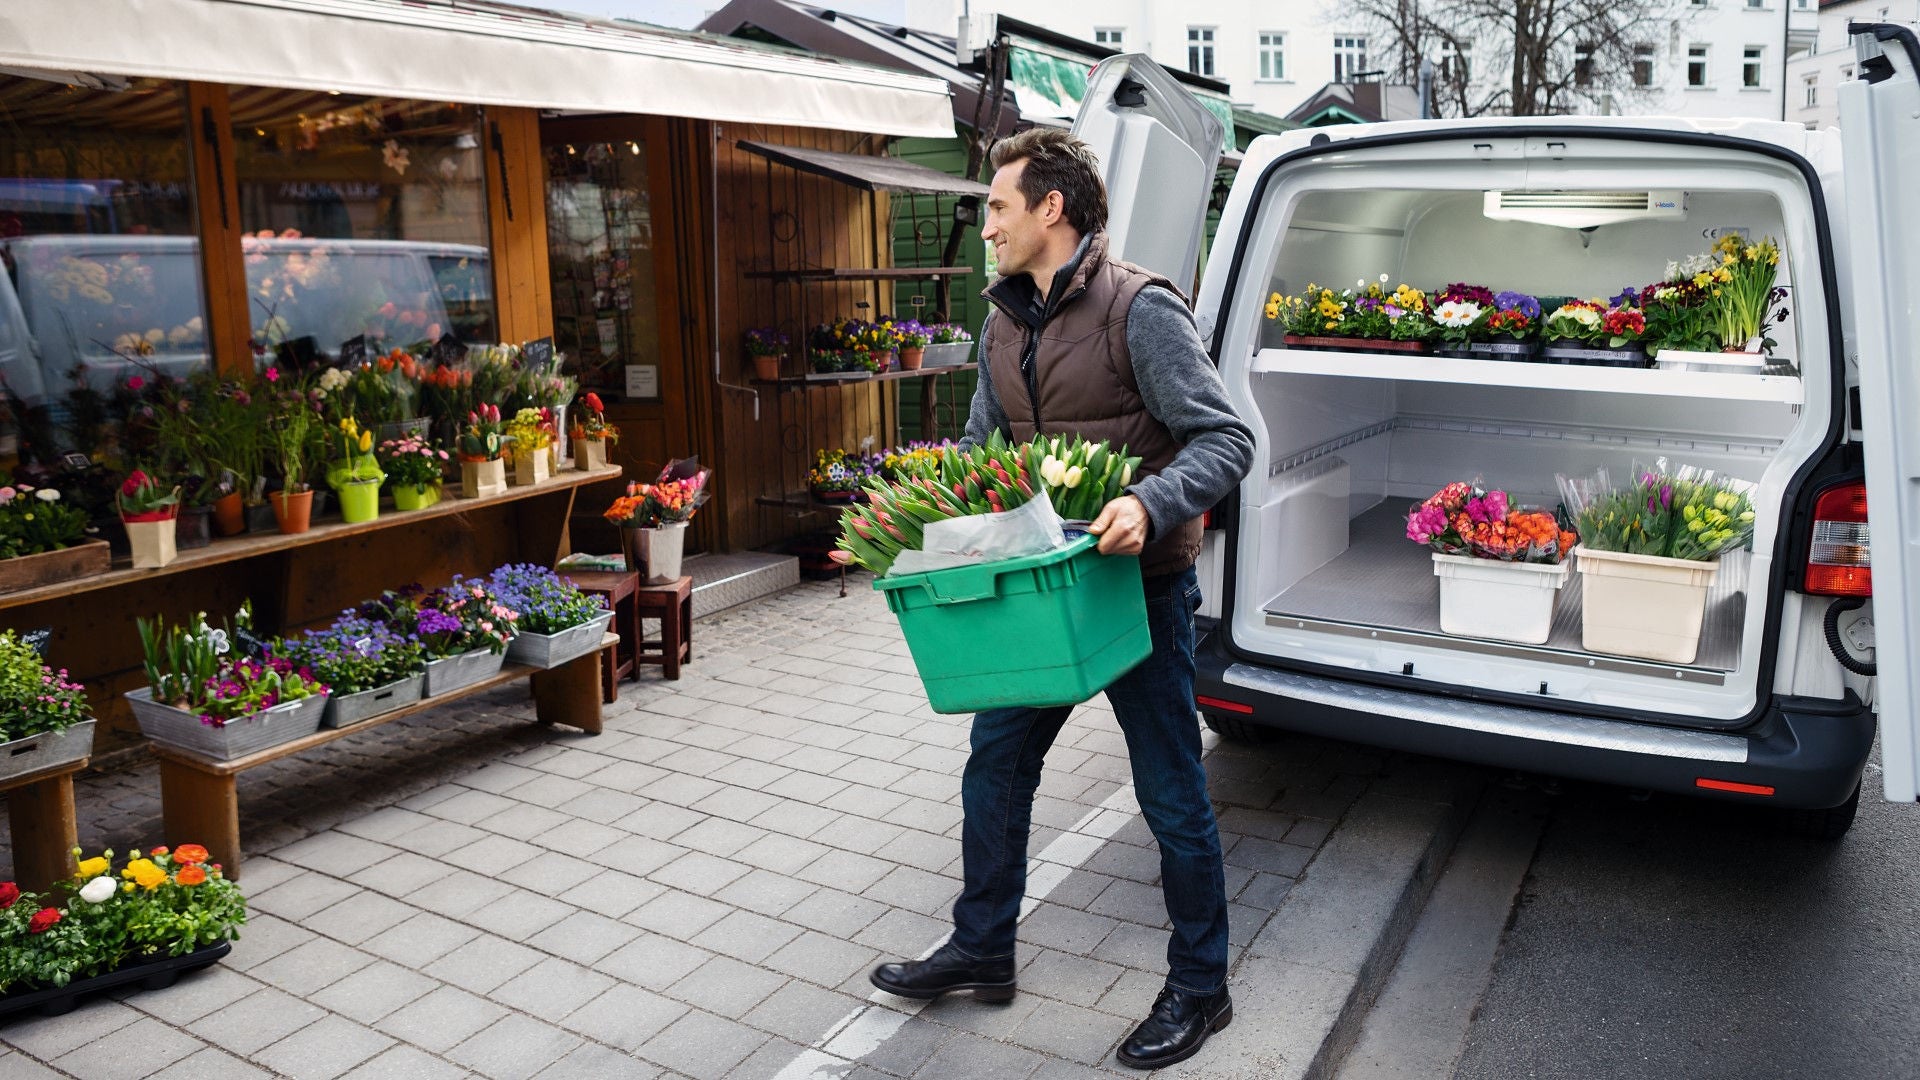 Man getting flowers from his light duty vehicle with transport refrigeration